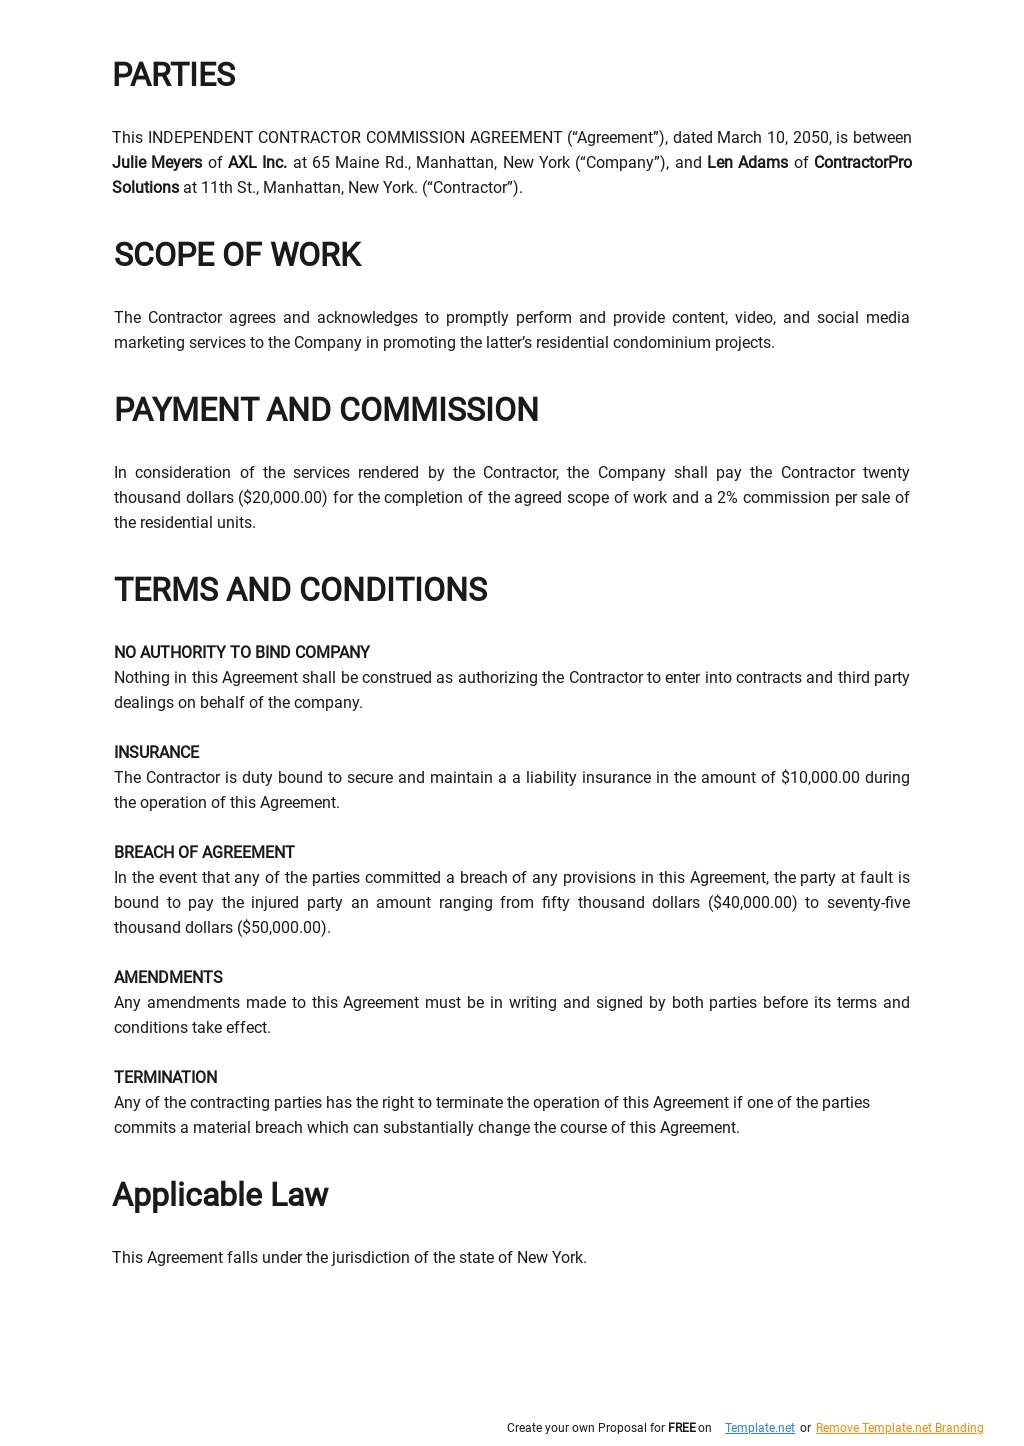 Independent Contractor Commission Agreement Template 1.jpe